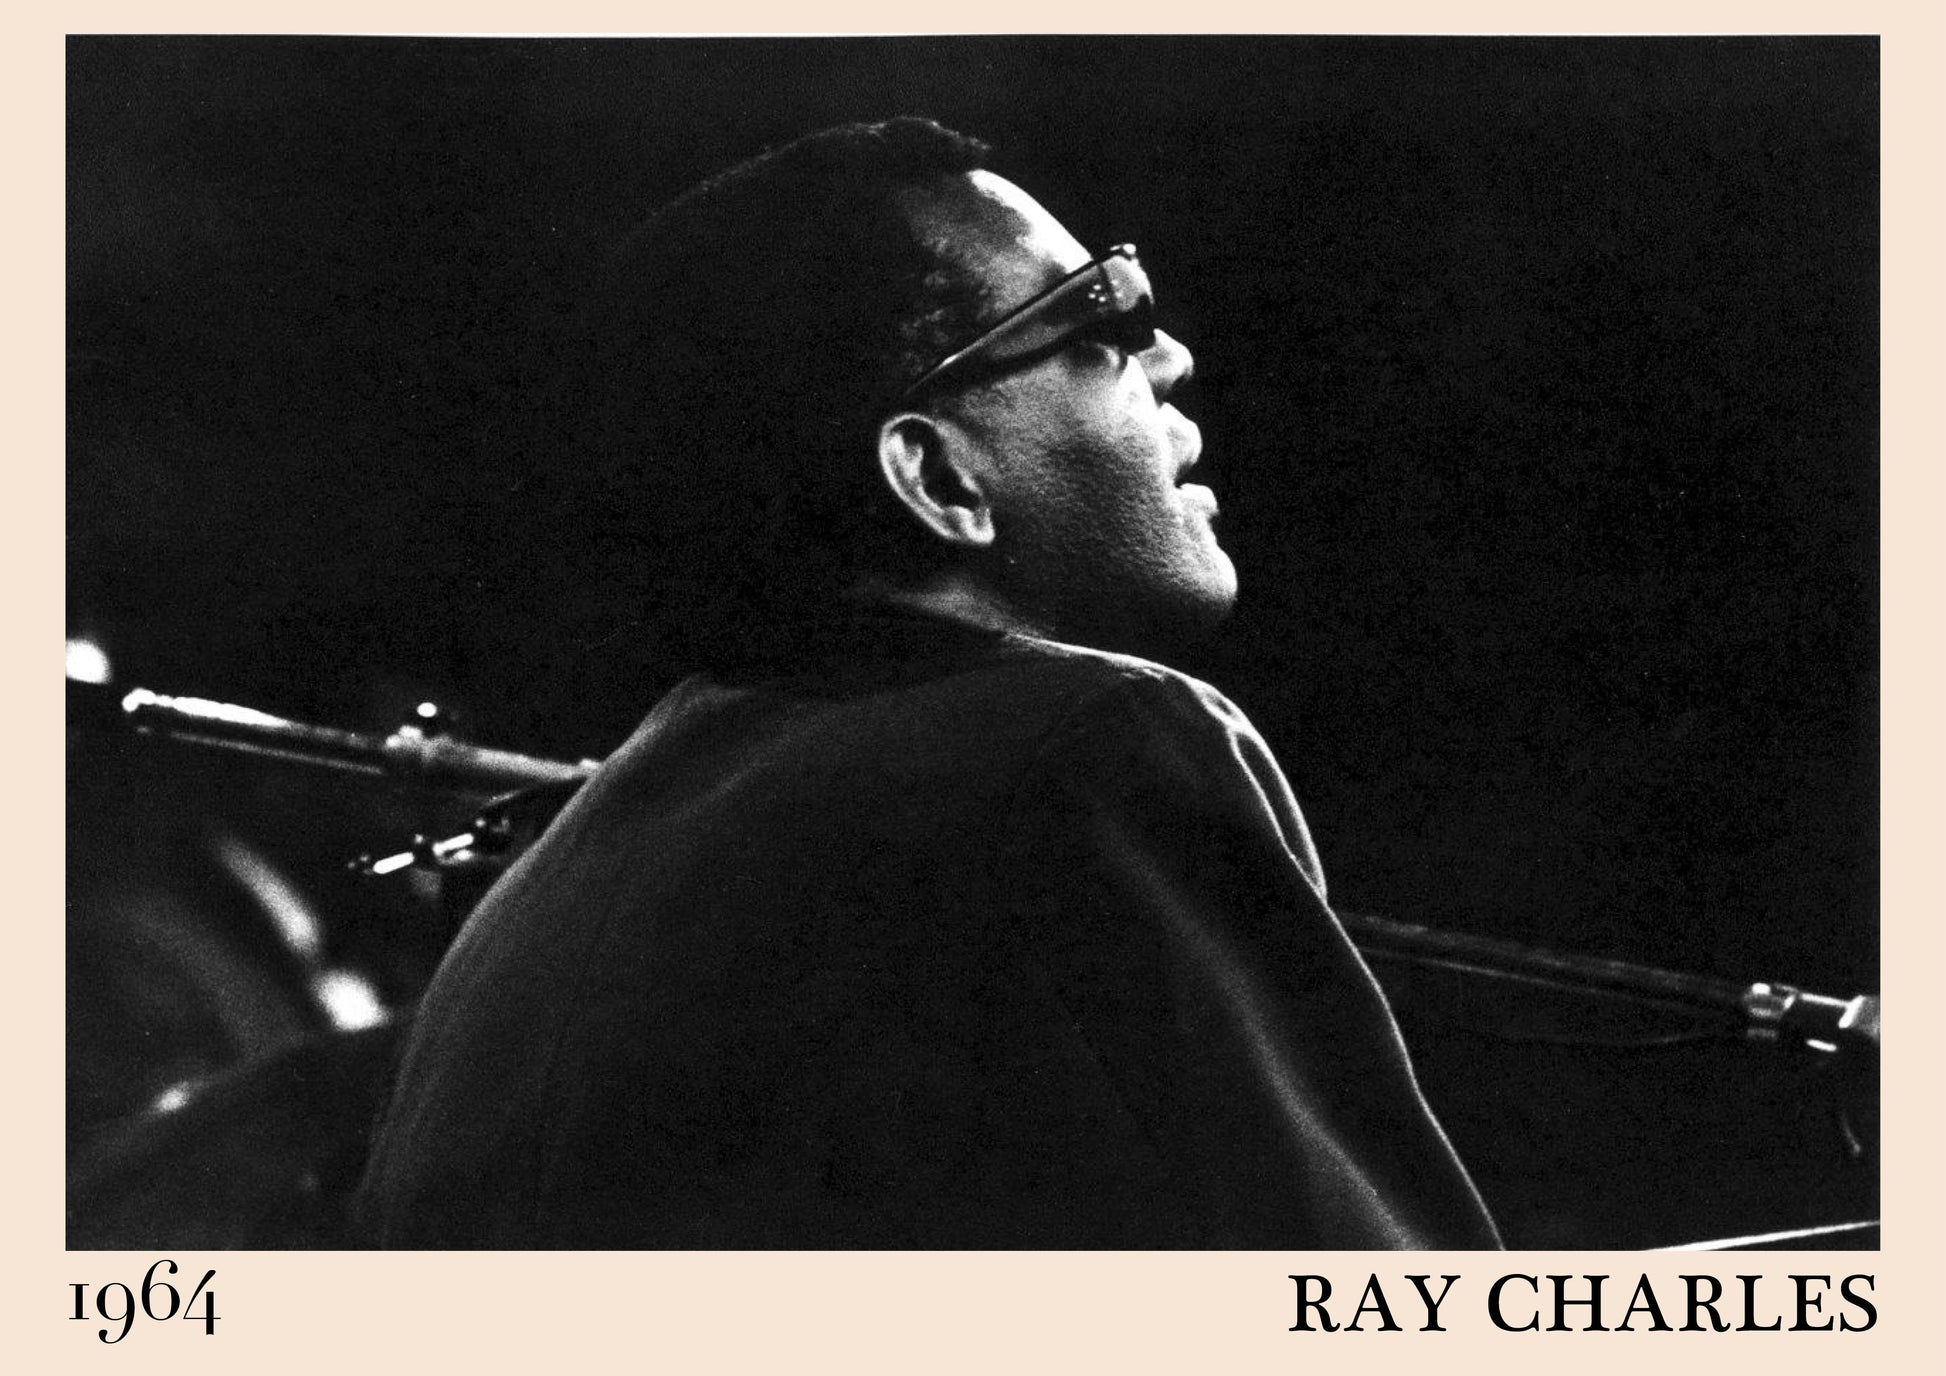  1964 photograph of blues legend Ray Charles, transformed into a cool poster